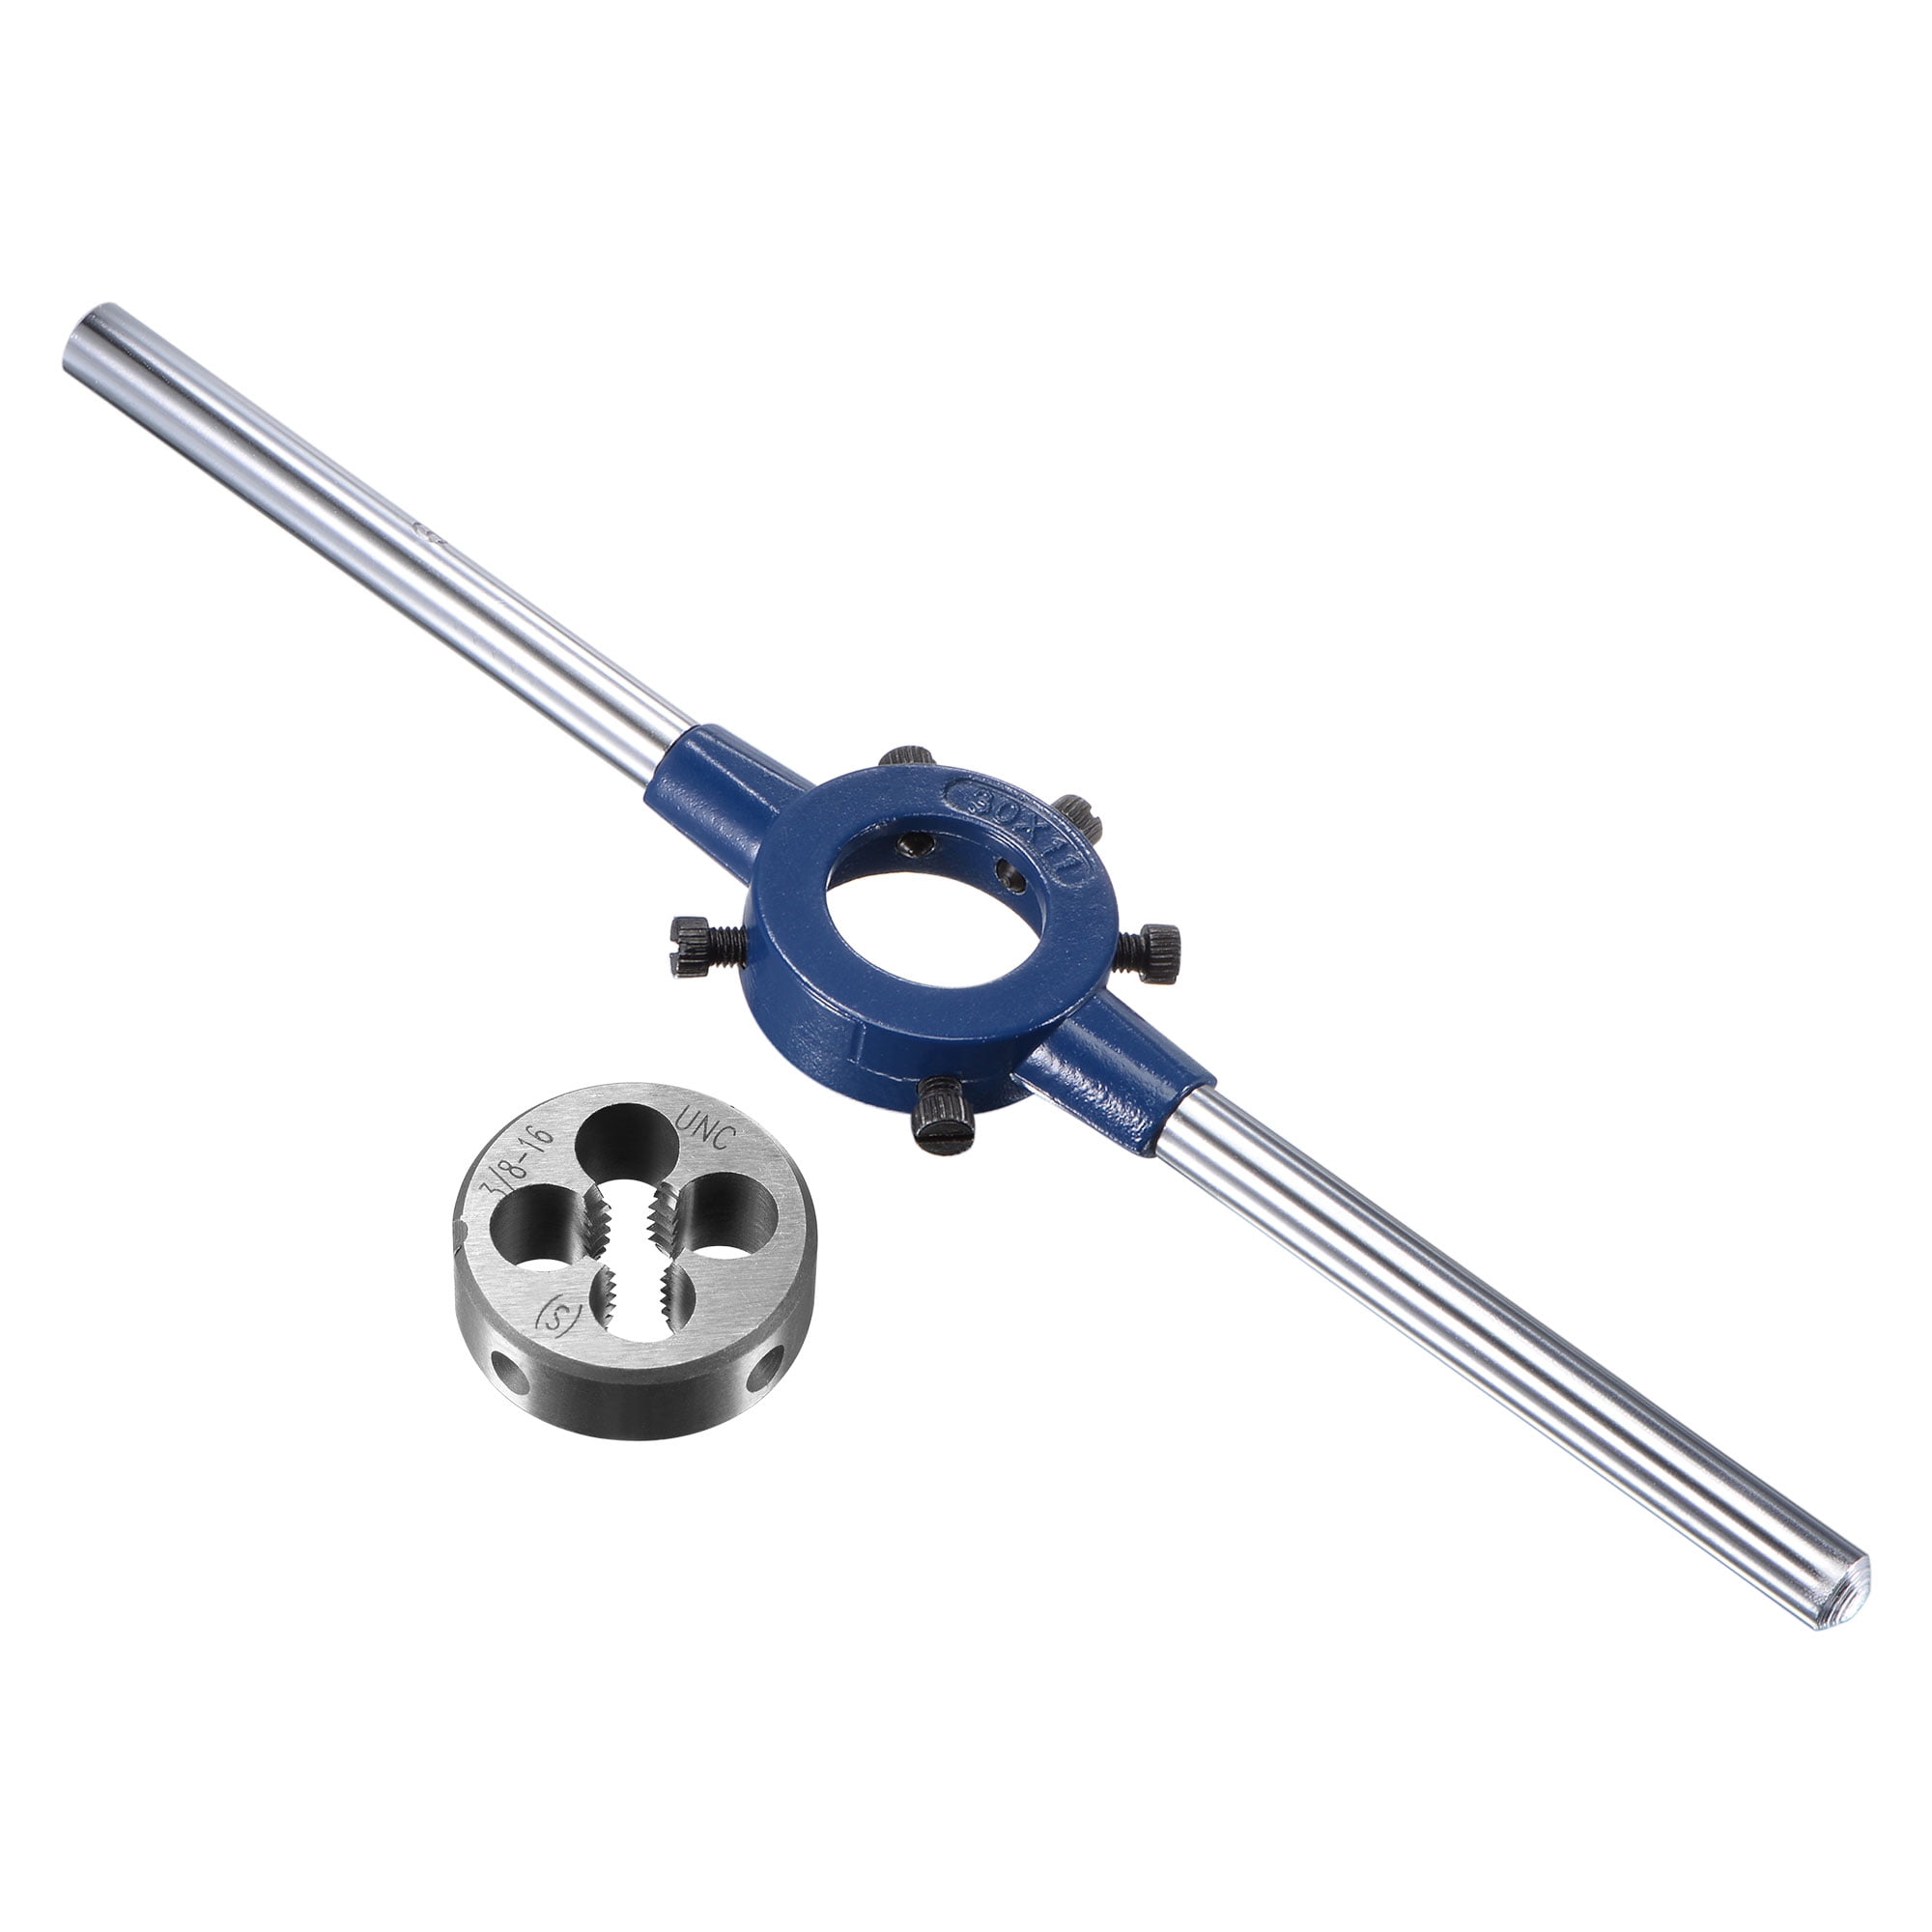 Round Plate Wrench Round Die Stock Holder Thread Tap Wrench Handle Bar Tools 